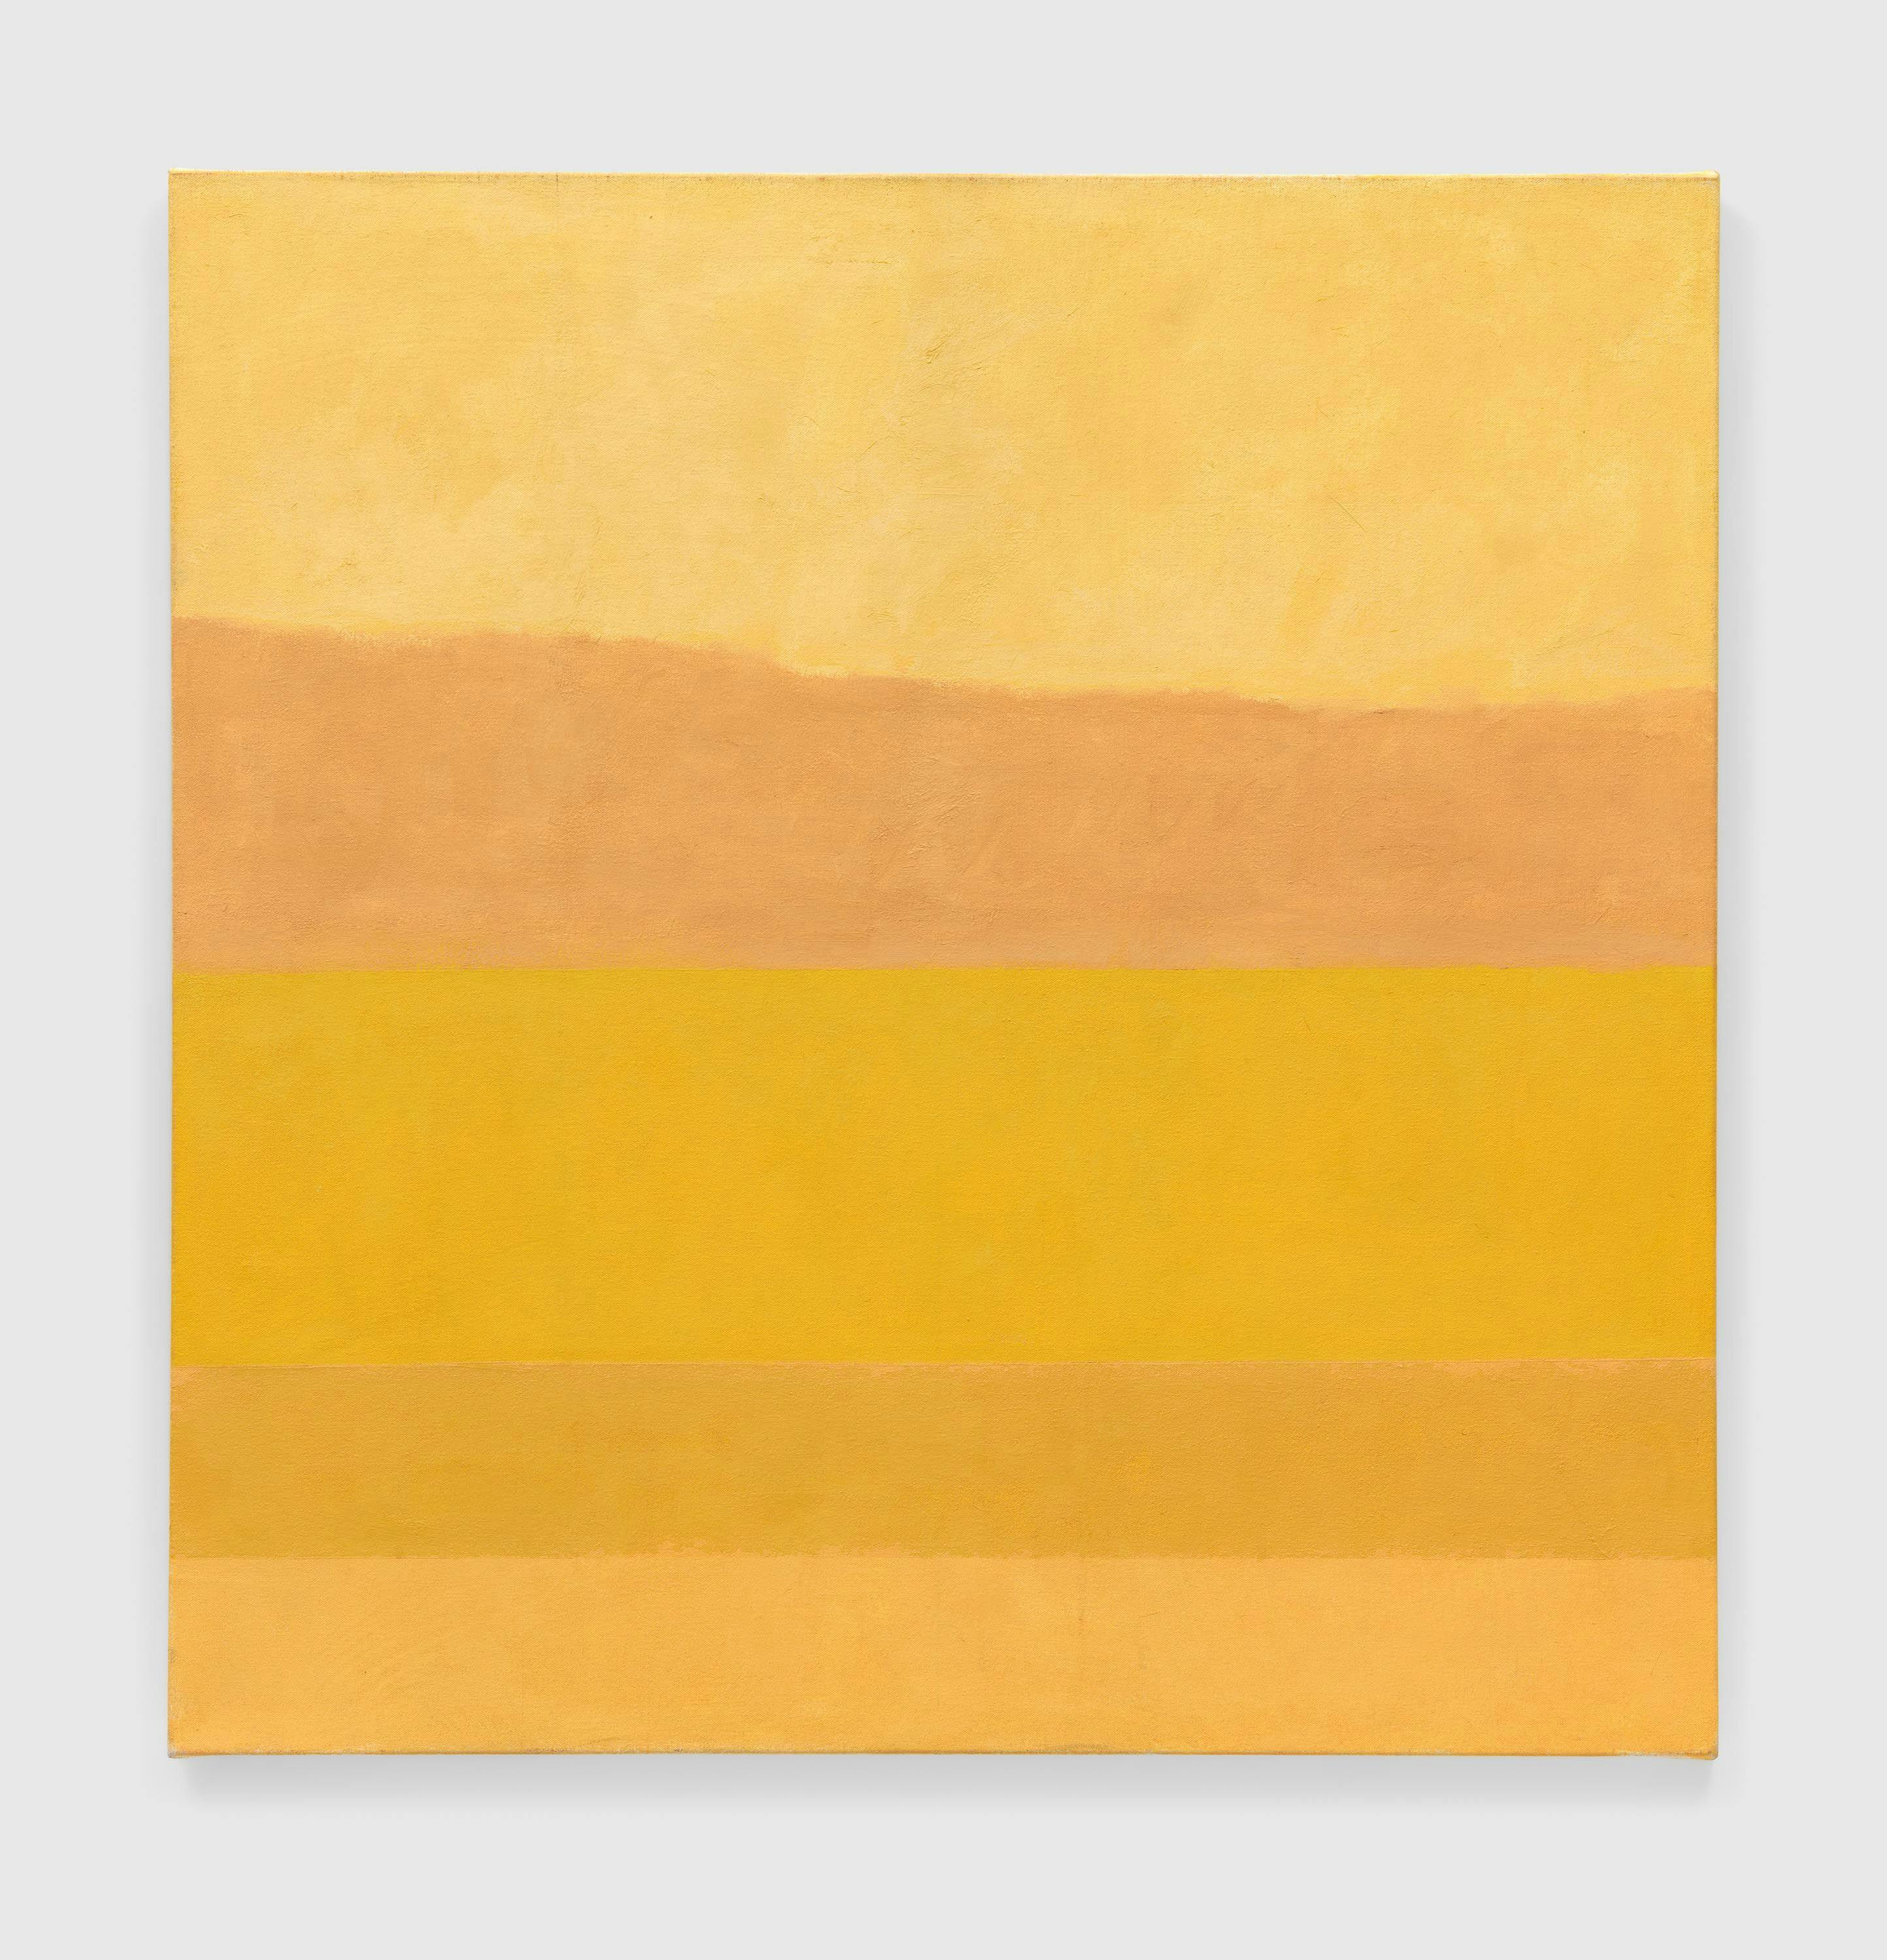 A painting by Merrill Wagner, titled ﻿Ucross 2002: 5 Brands of Naples Yellow, dated 2004.